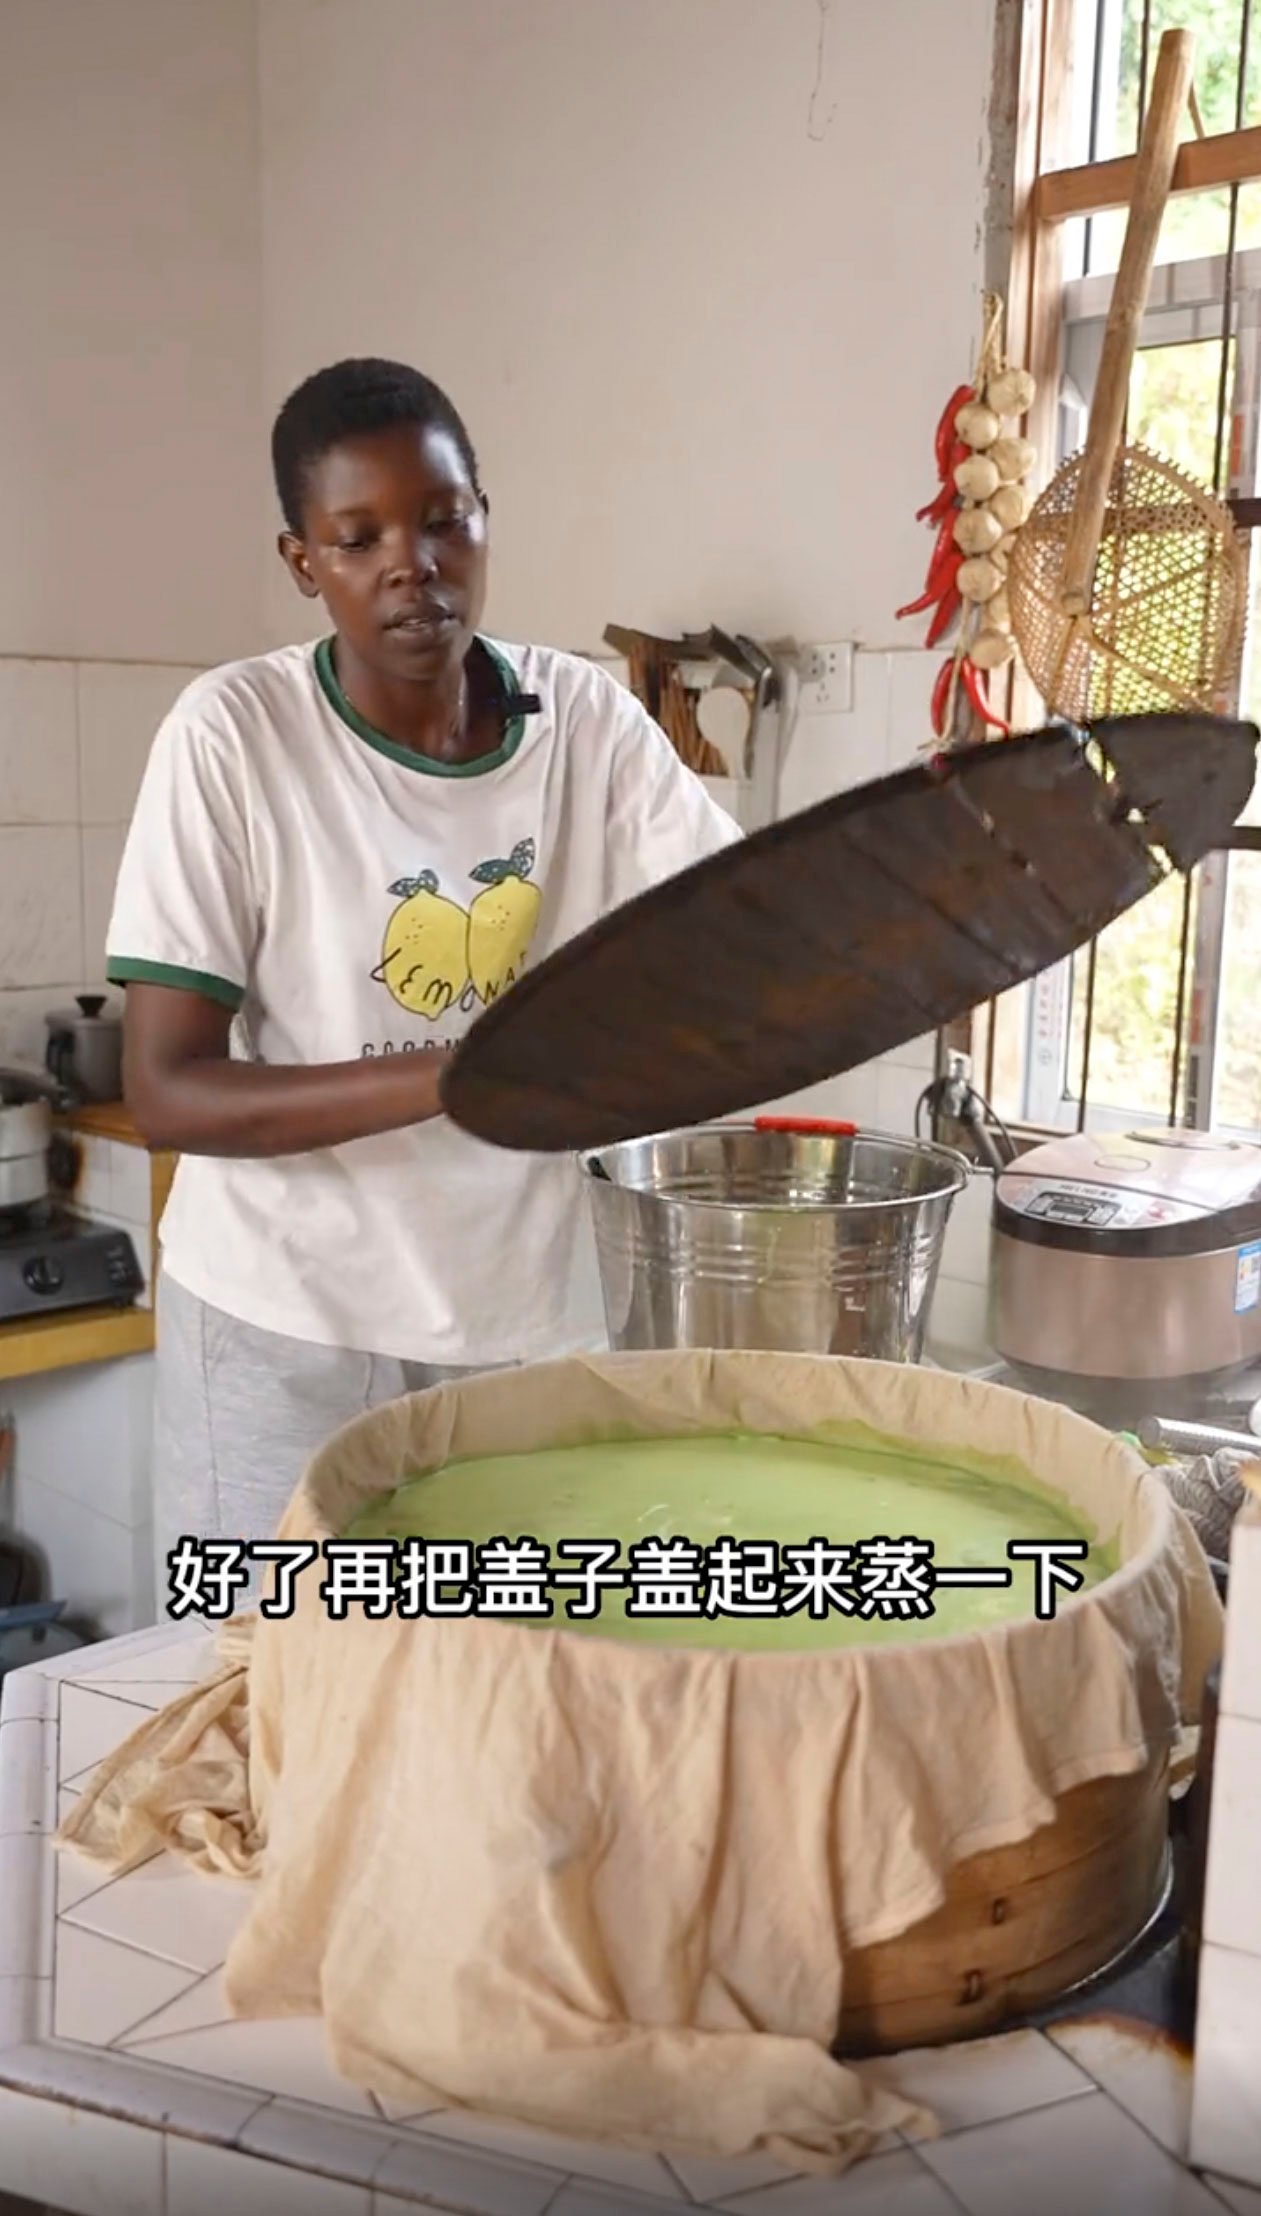 Rose is already being called China’s ‘African Li Ziqi’, after the famous Chinese food influencer. Photo: Douyin